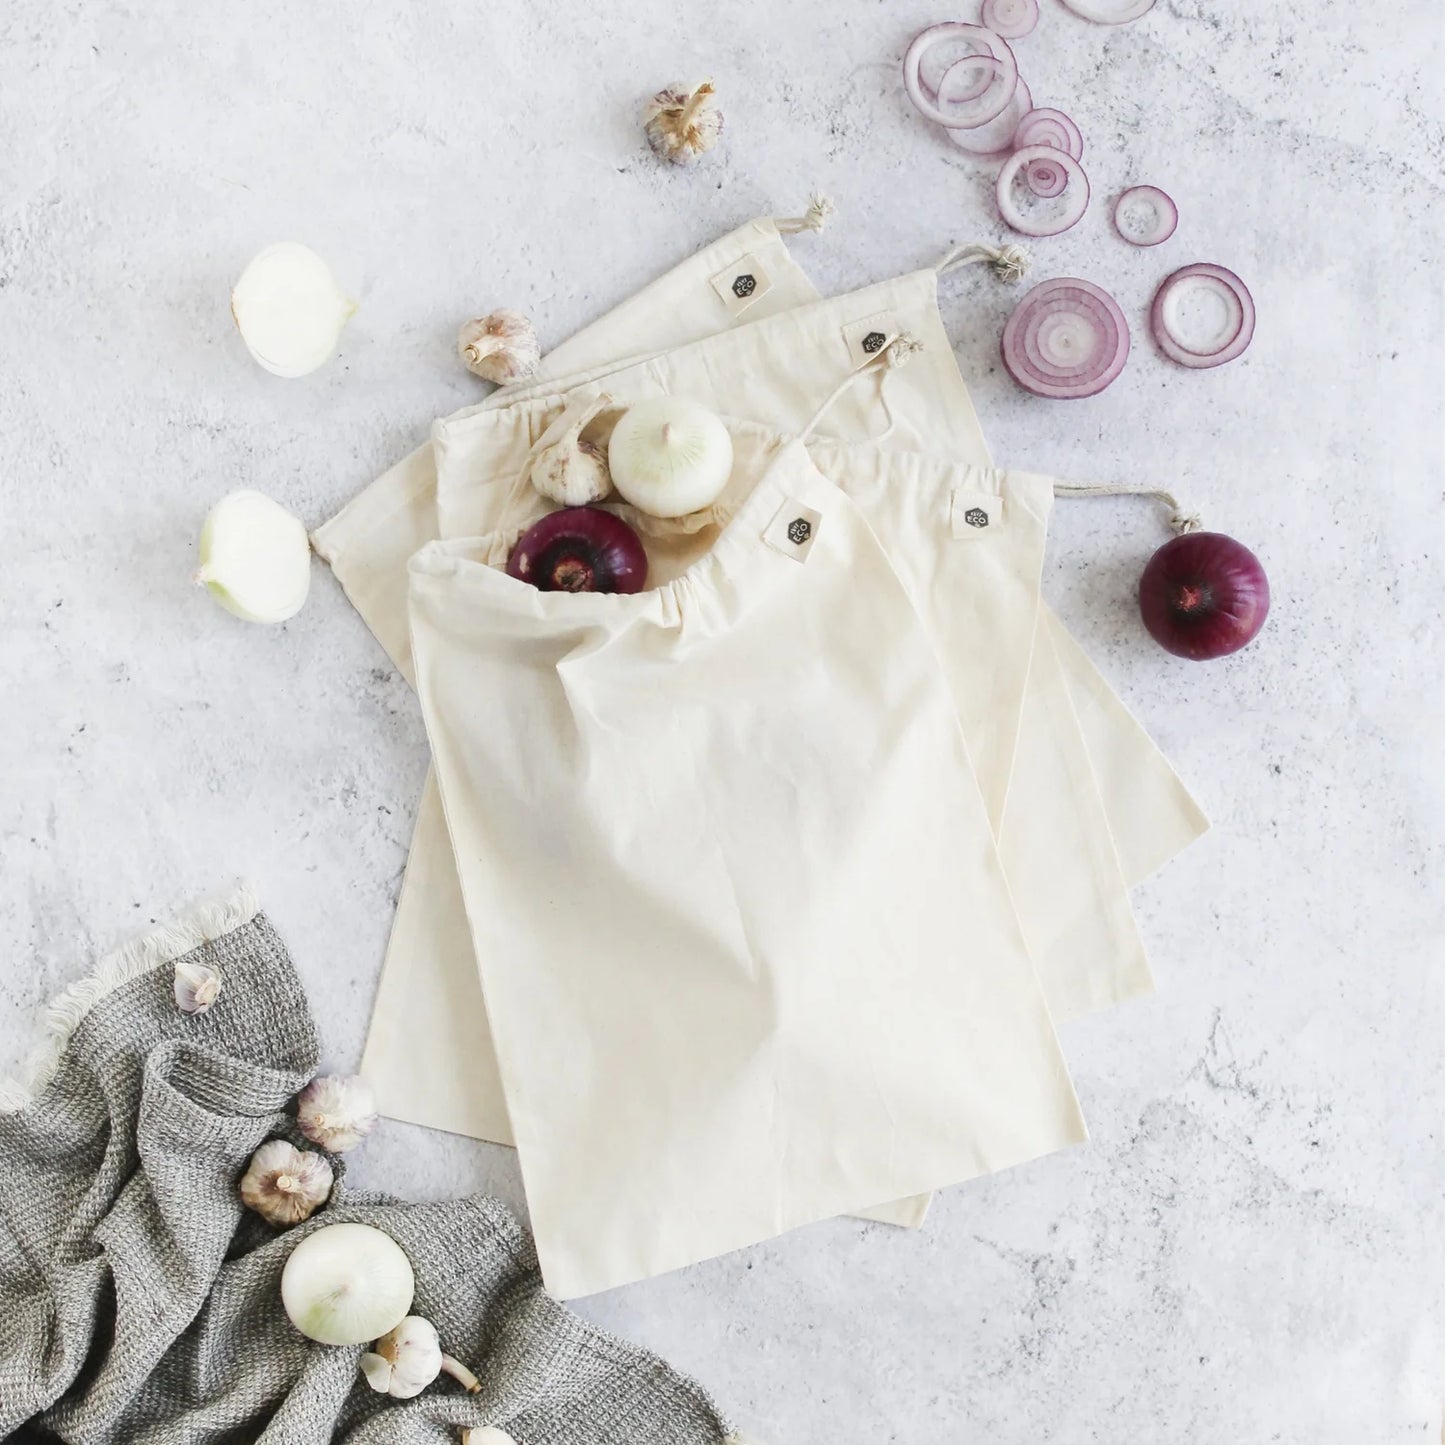 Ever Eco - Organic Cotton Muslin Produce Bags - 4 Pack